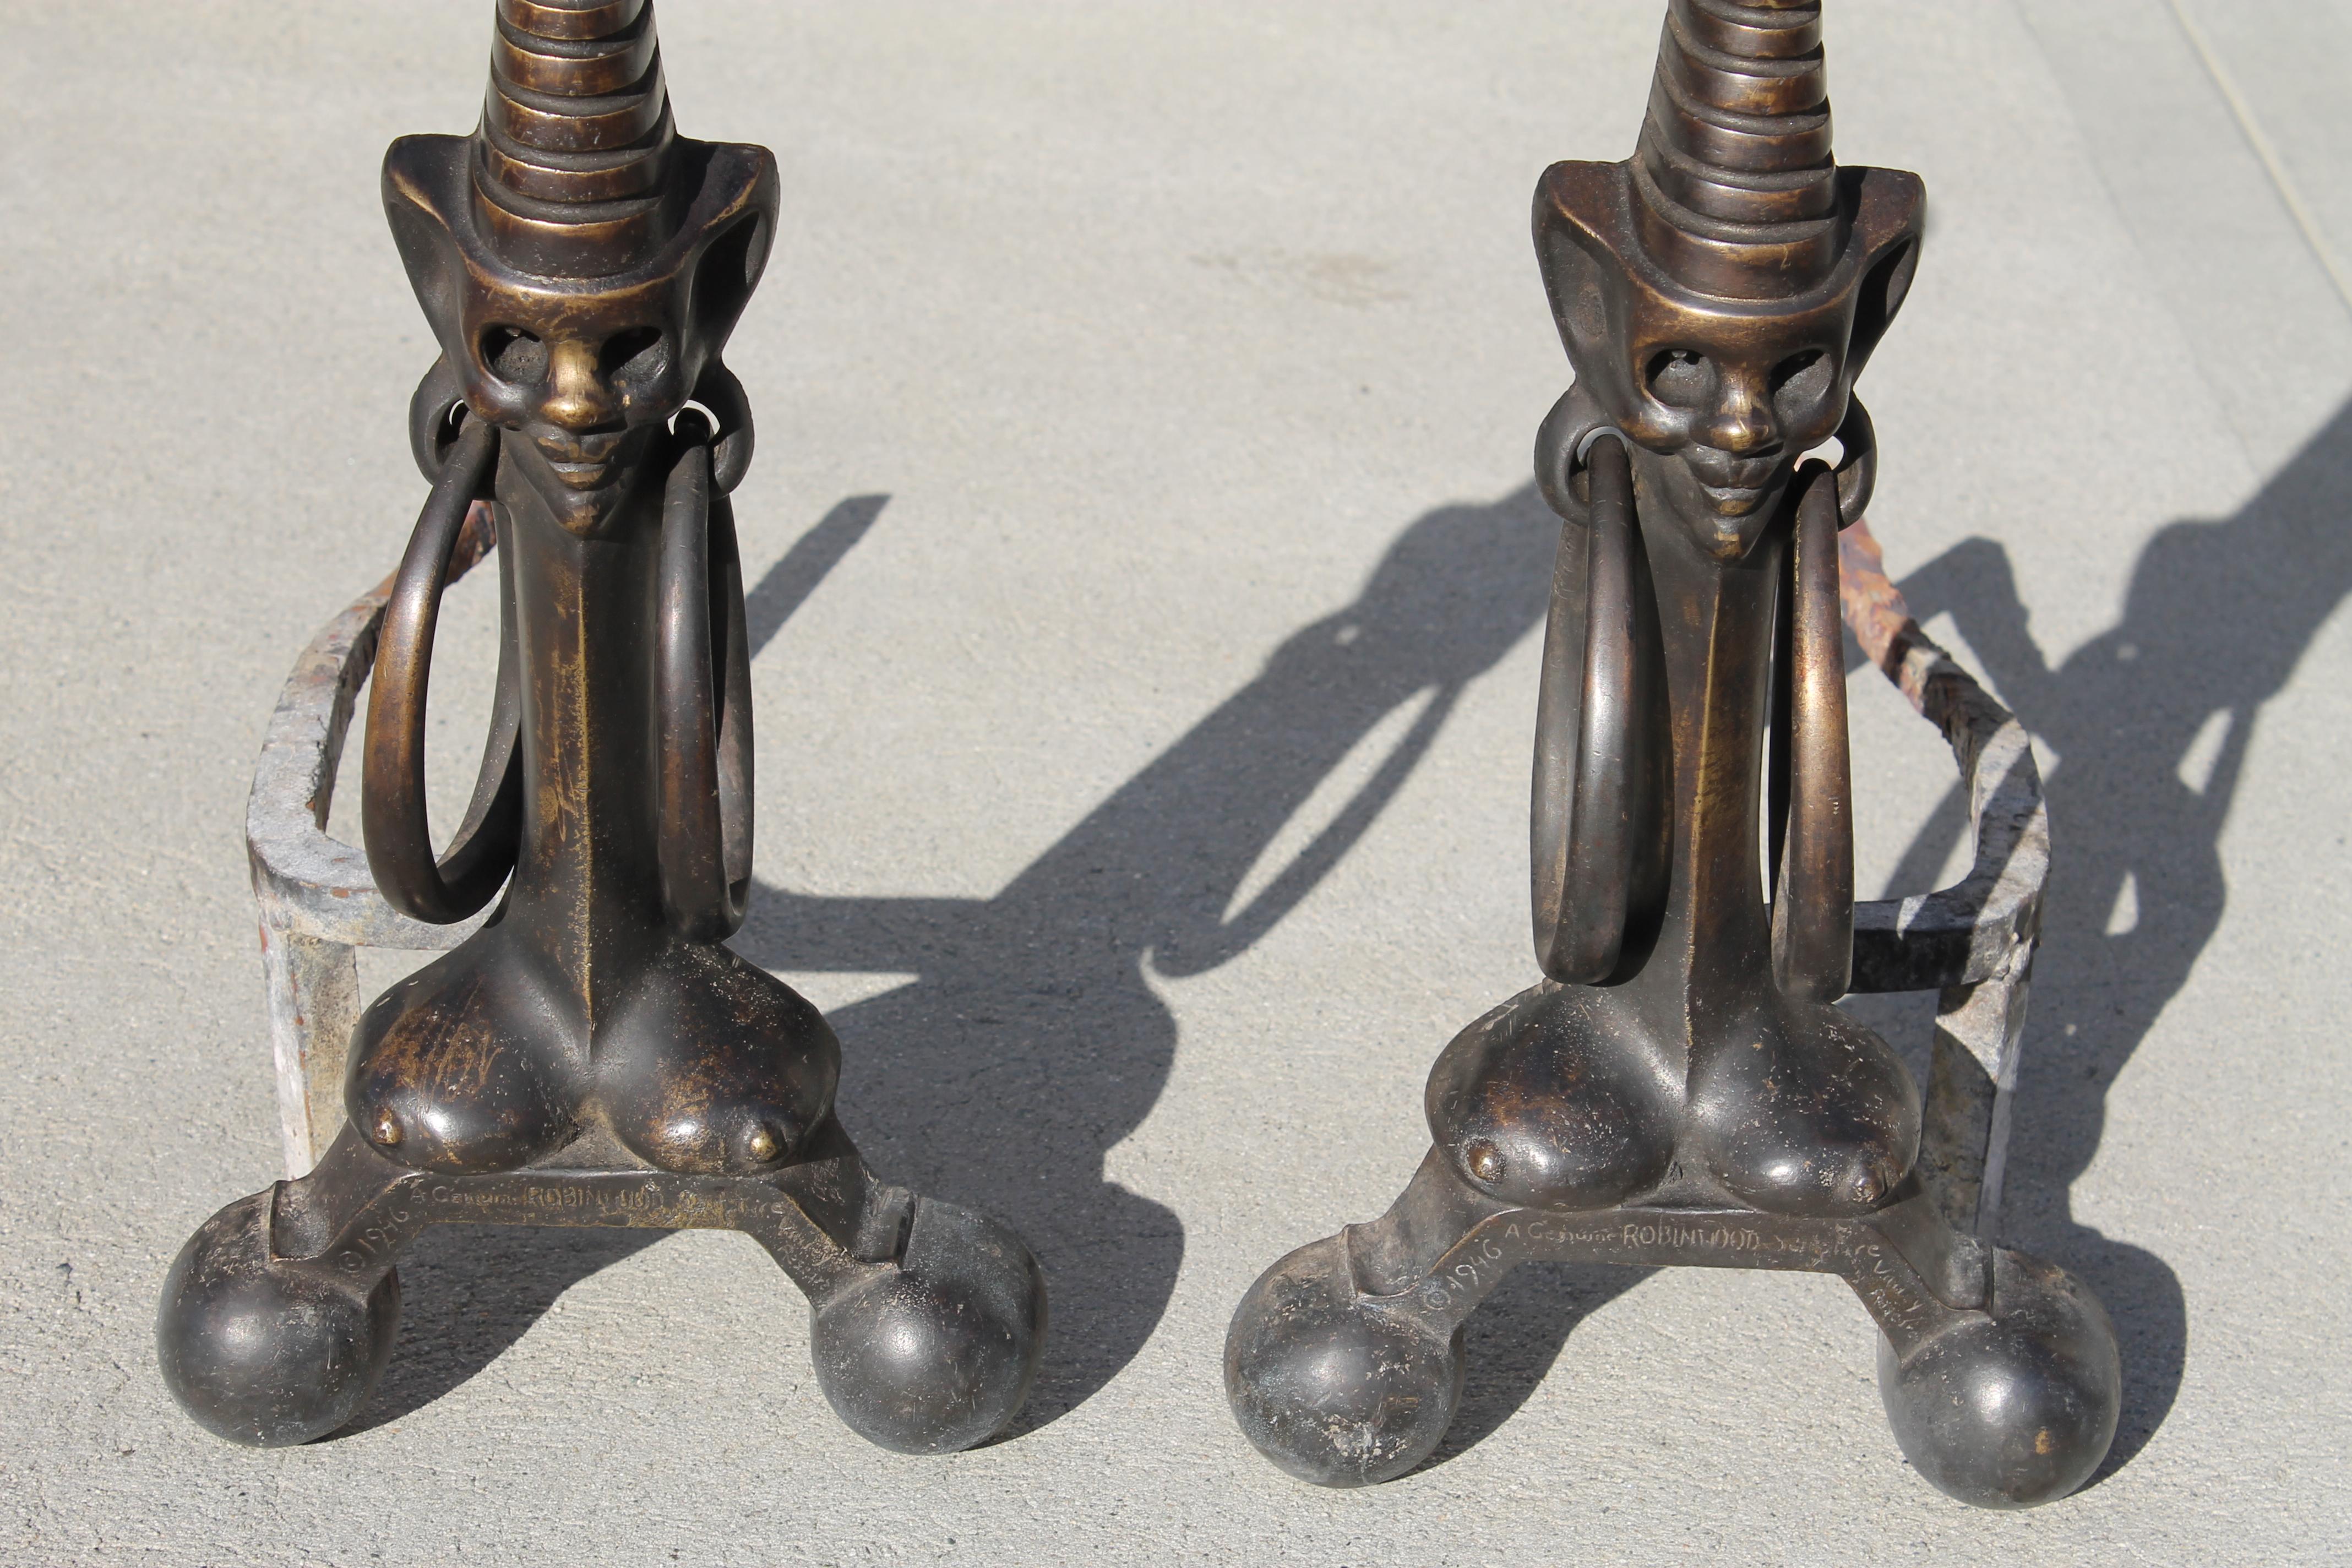 An unusual pair of mid century modern (circa 1940s) solid bronze andirons in the form of stylized African figures with giant hoop earrings. Early Hollywood Regency style. These are marked (Copyright) 1946, a genuine robinwood sculpture, then a name